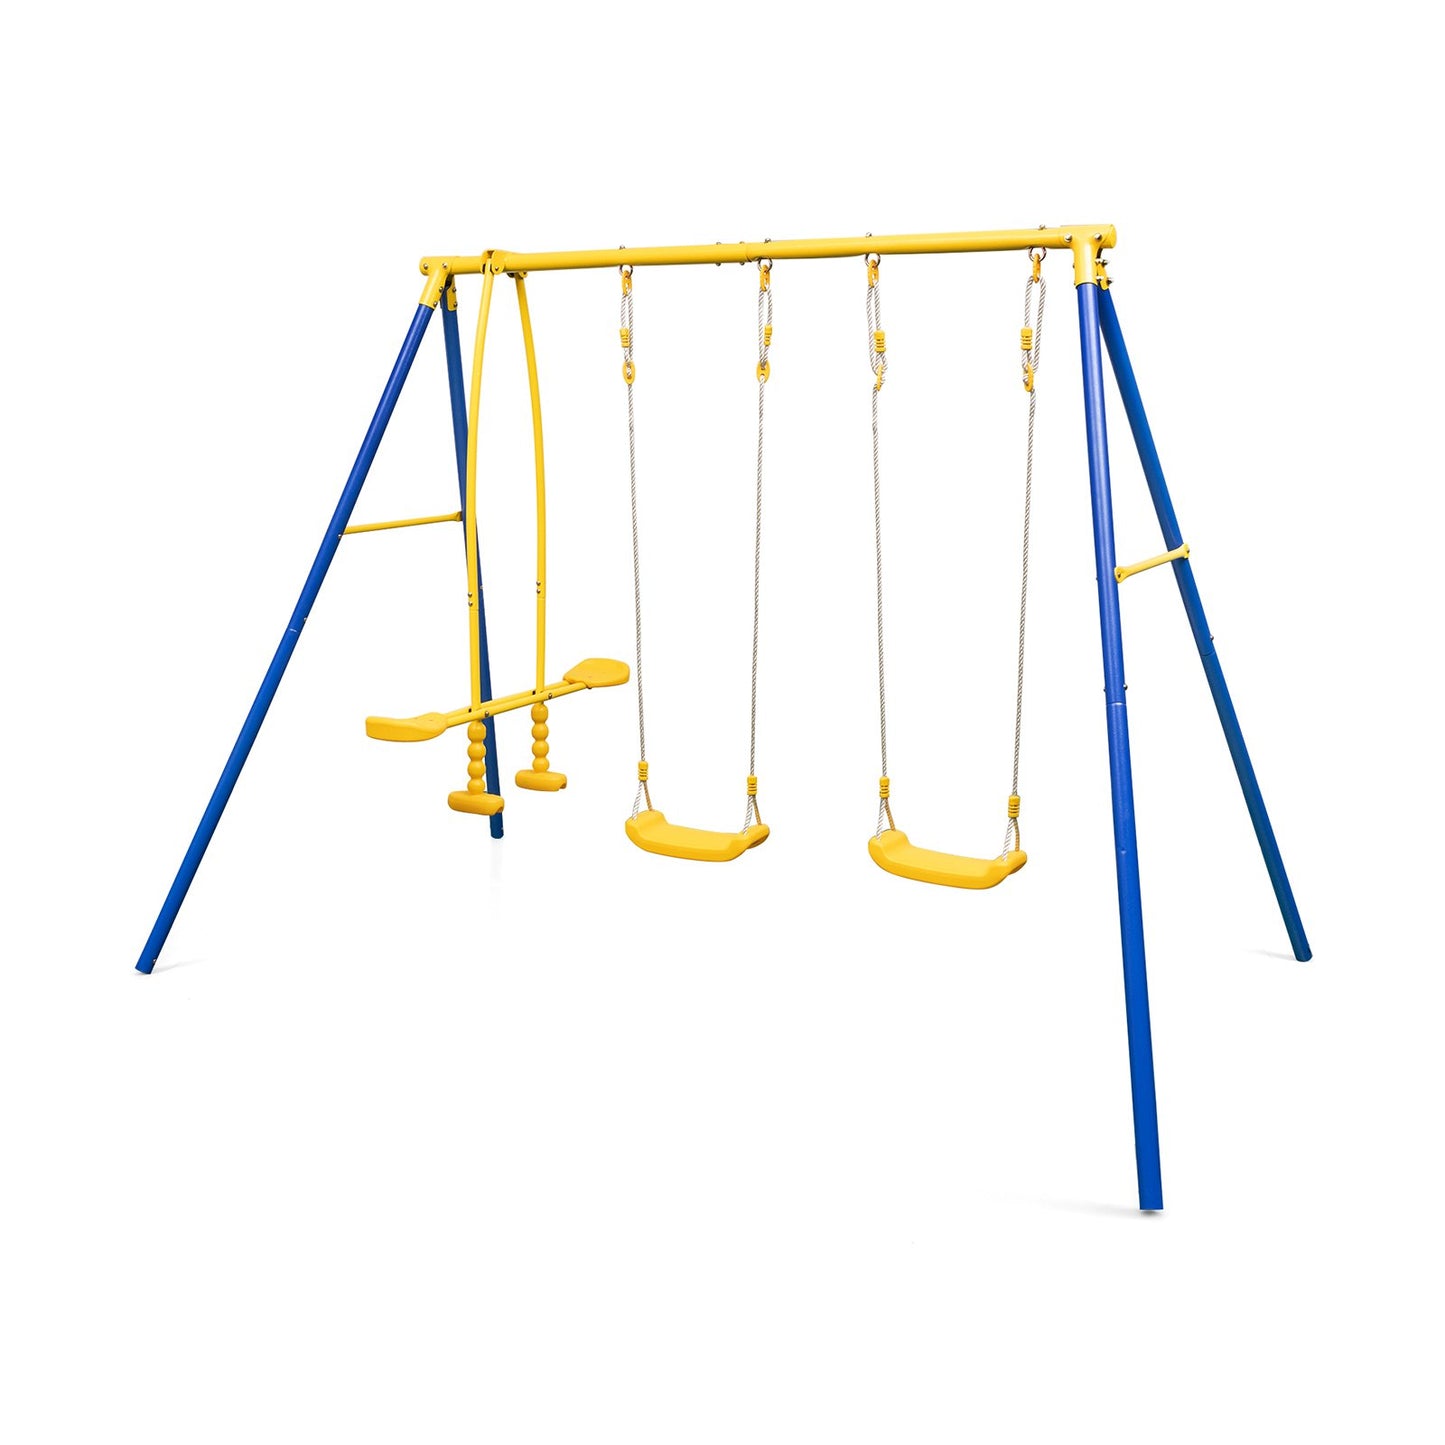 Metal Swing Set for Backyard with 2 Swing Seats and 2 Glider Seats, Blue